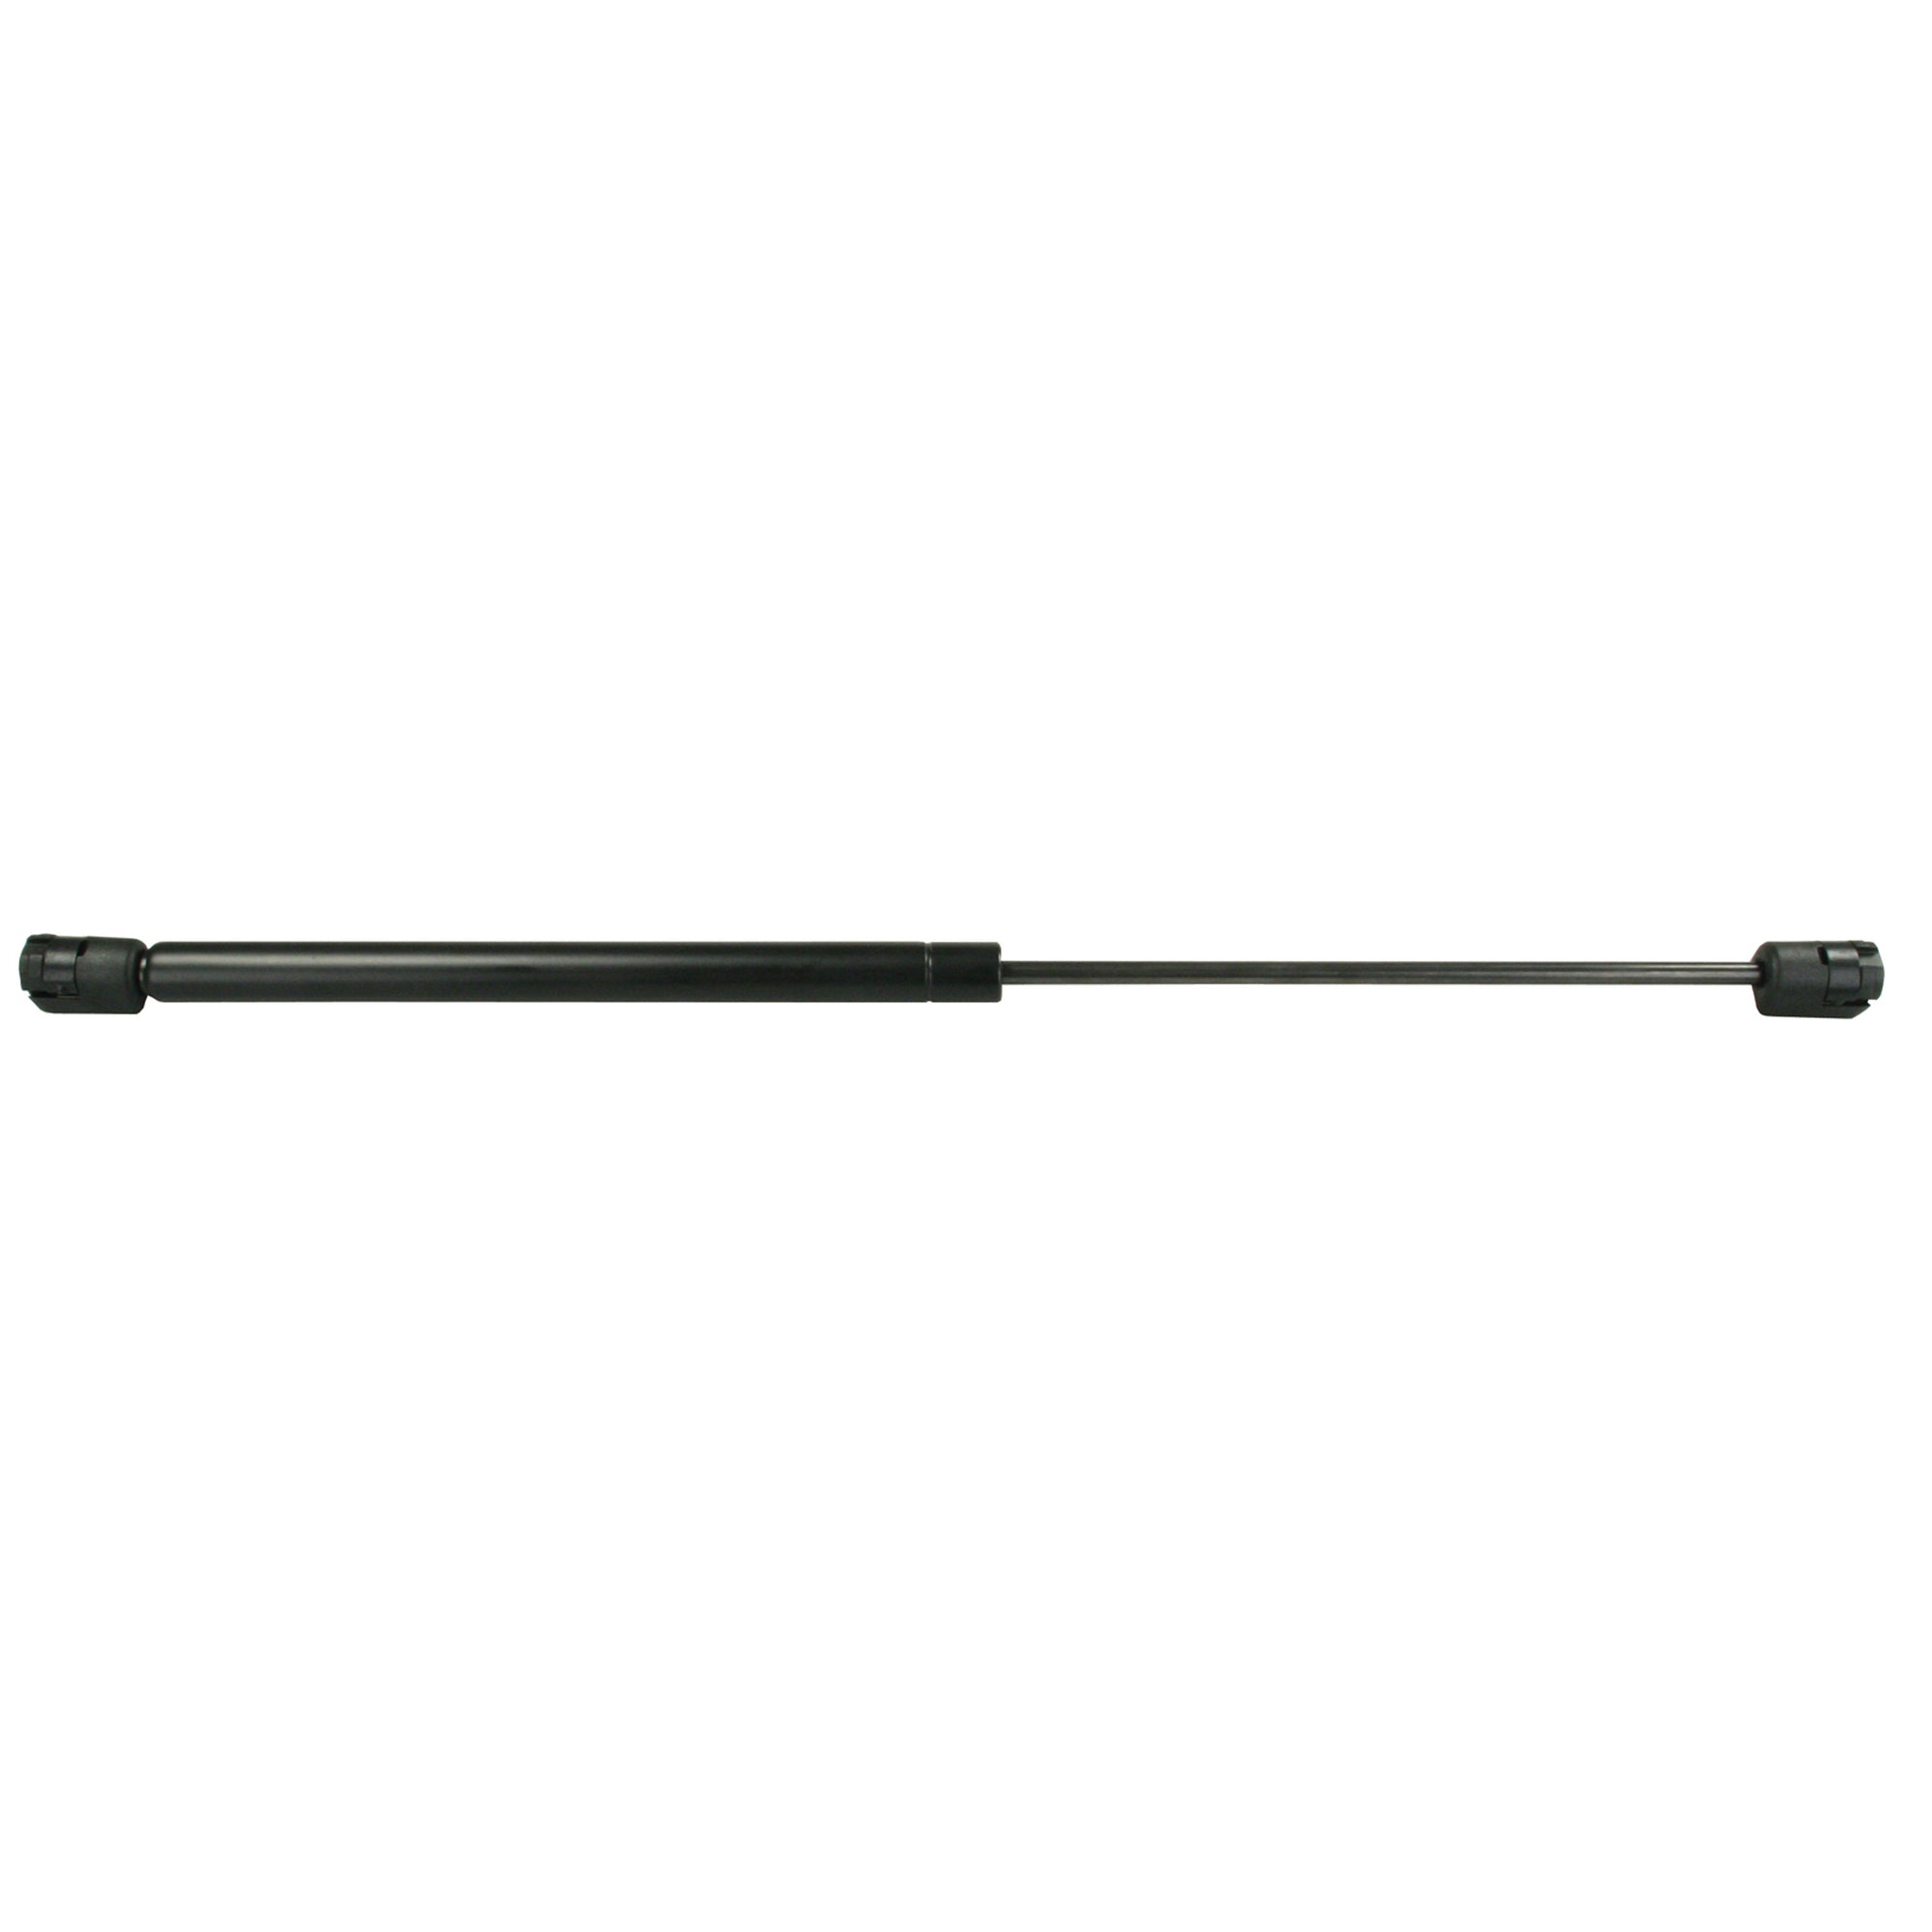 JR Products GSNI-4900-40 Gas Spring